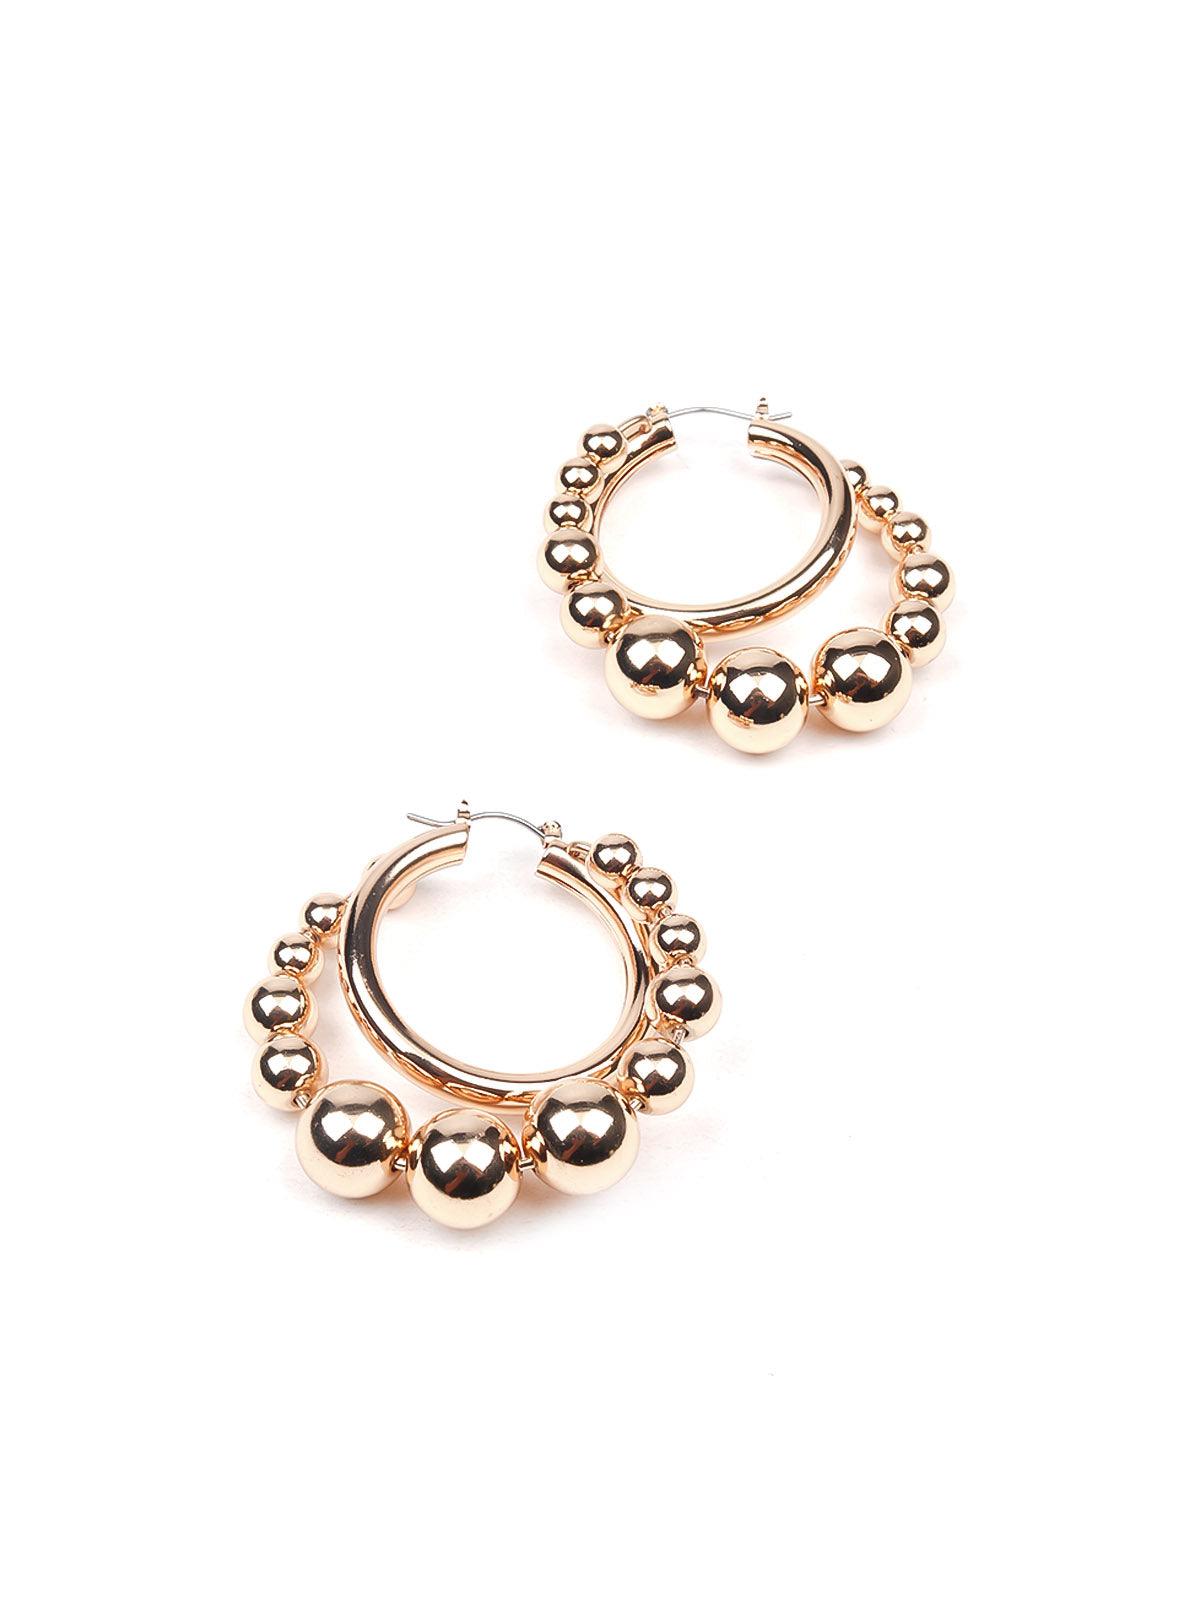 Women's Rounded Gold-Tone Beaded Statement Earrings - Odette